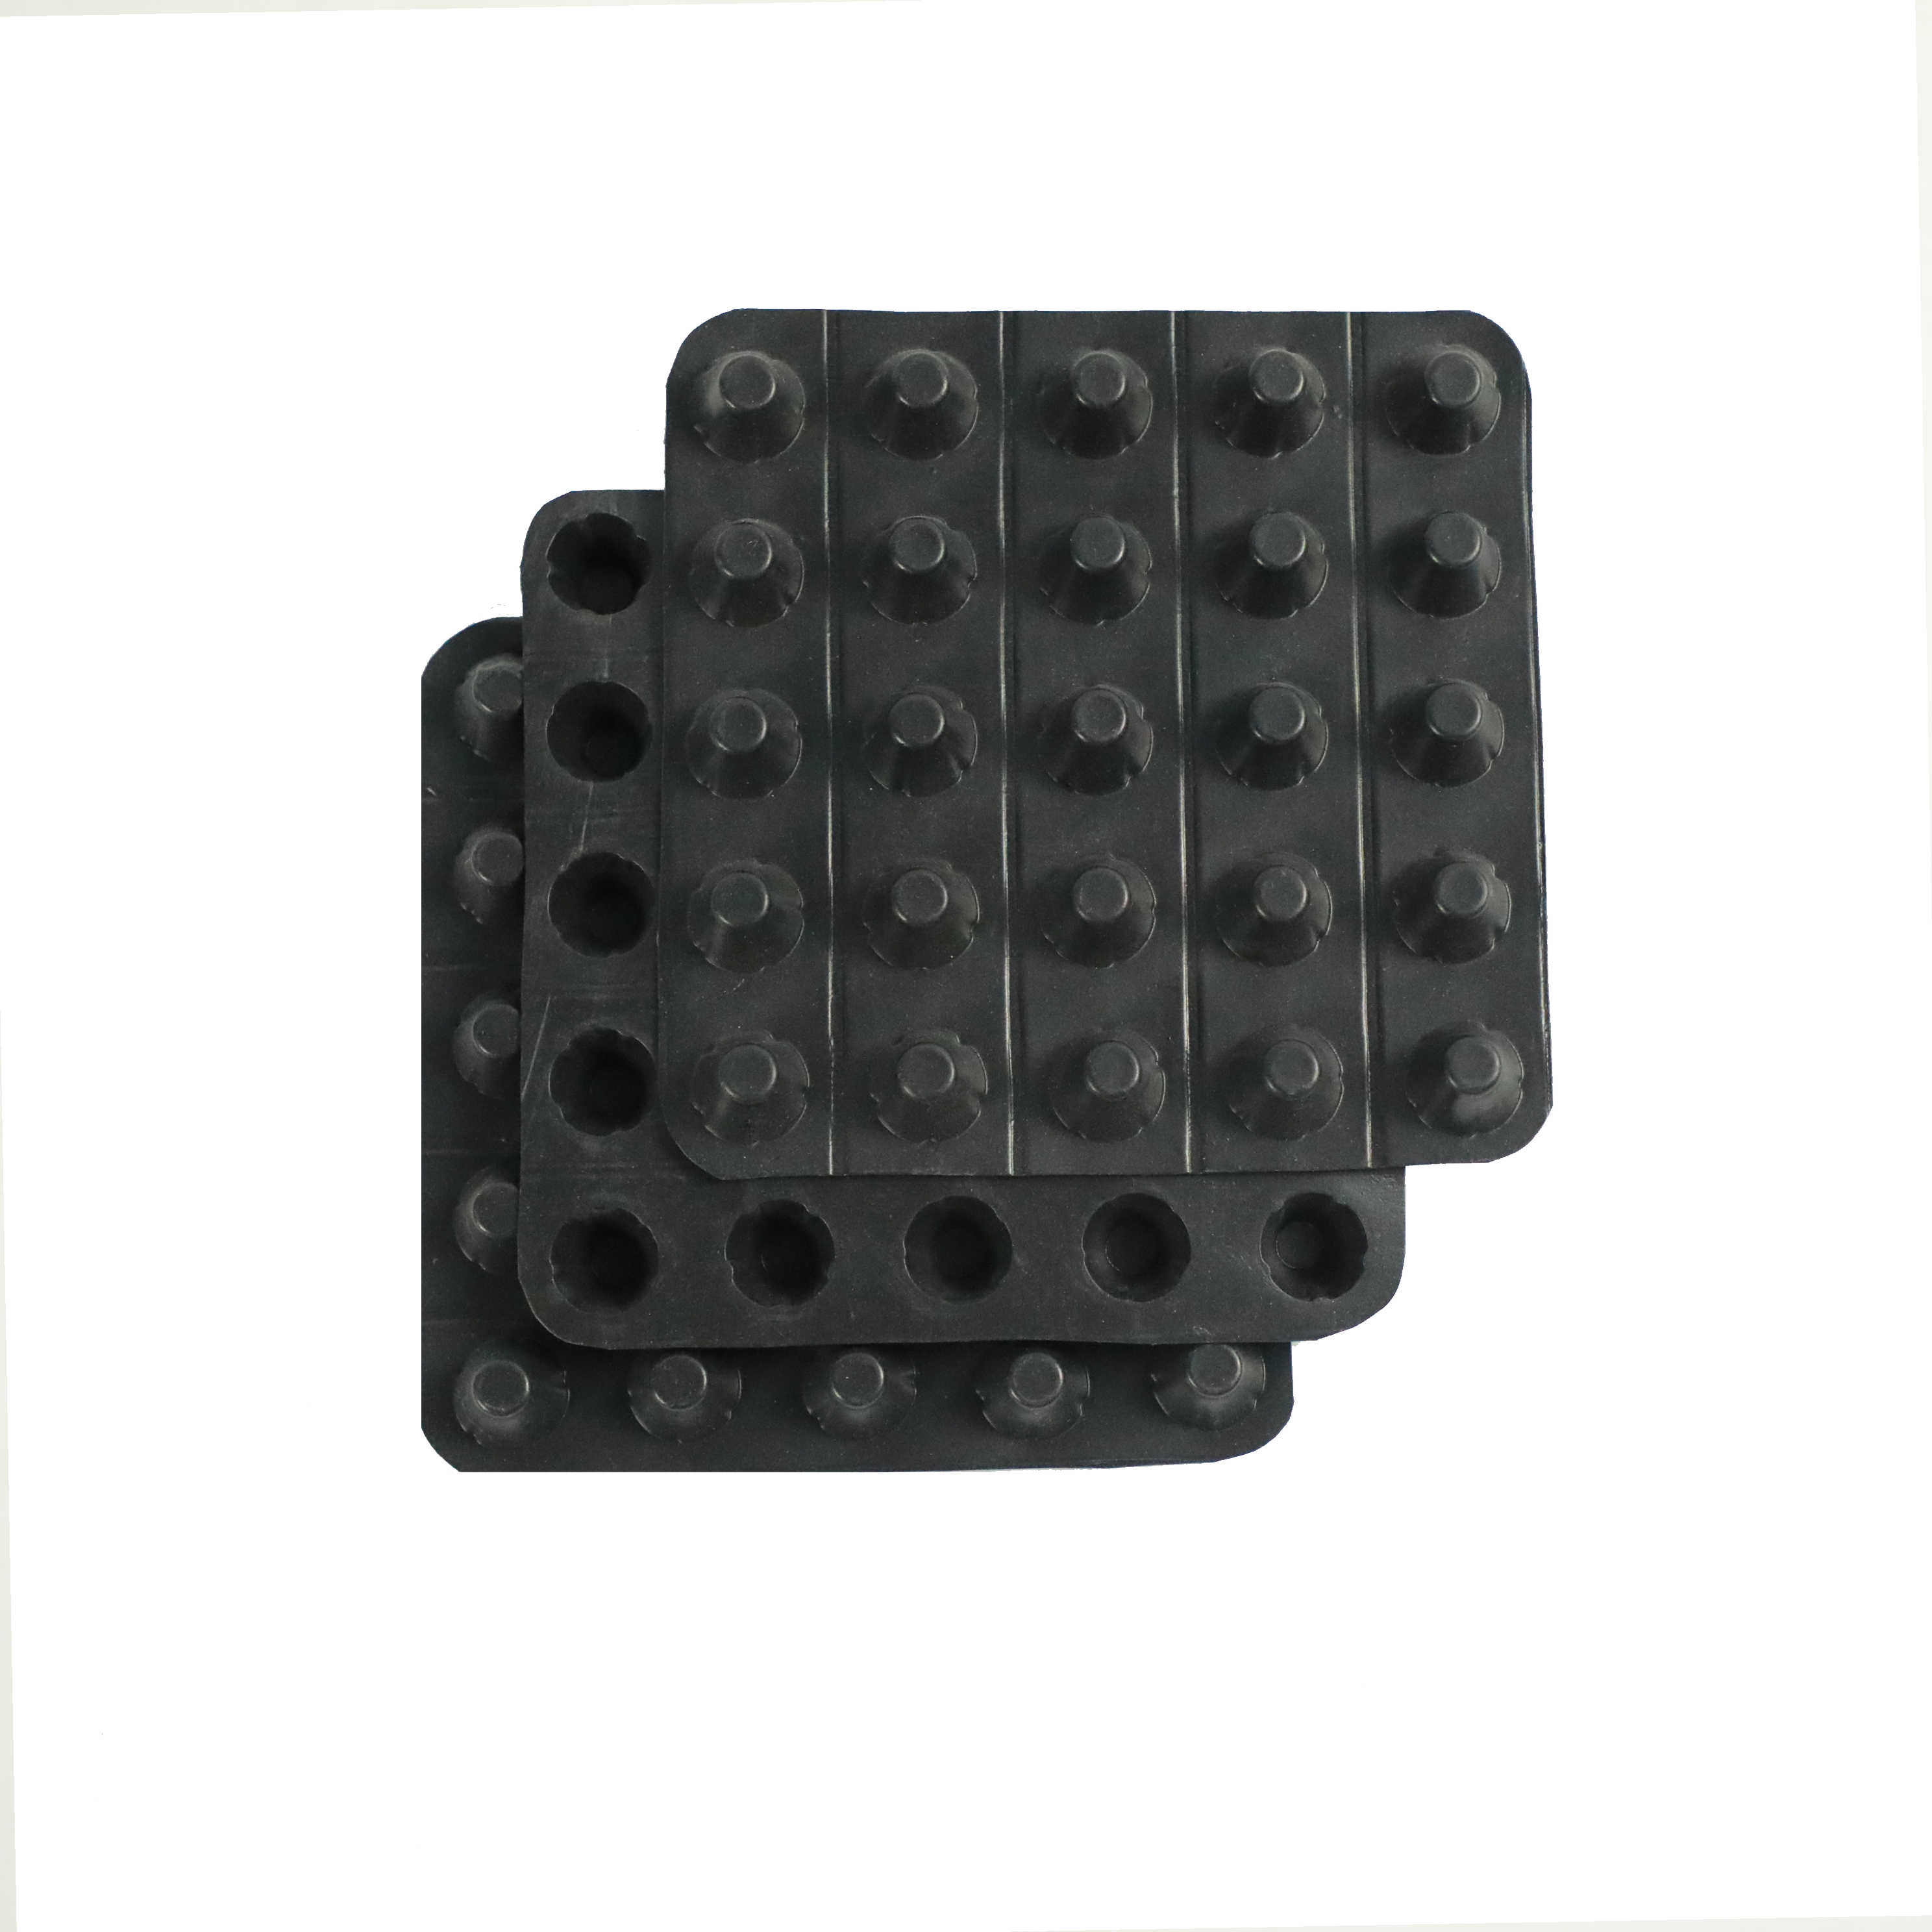  HDPE Dimple Plastic Drainage Board for Roof Garden